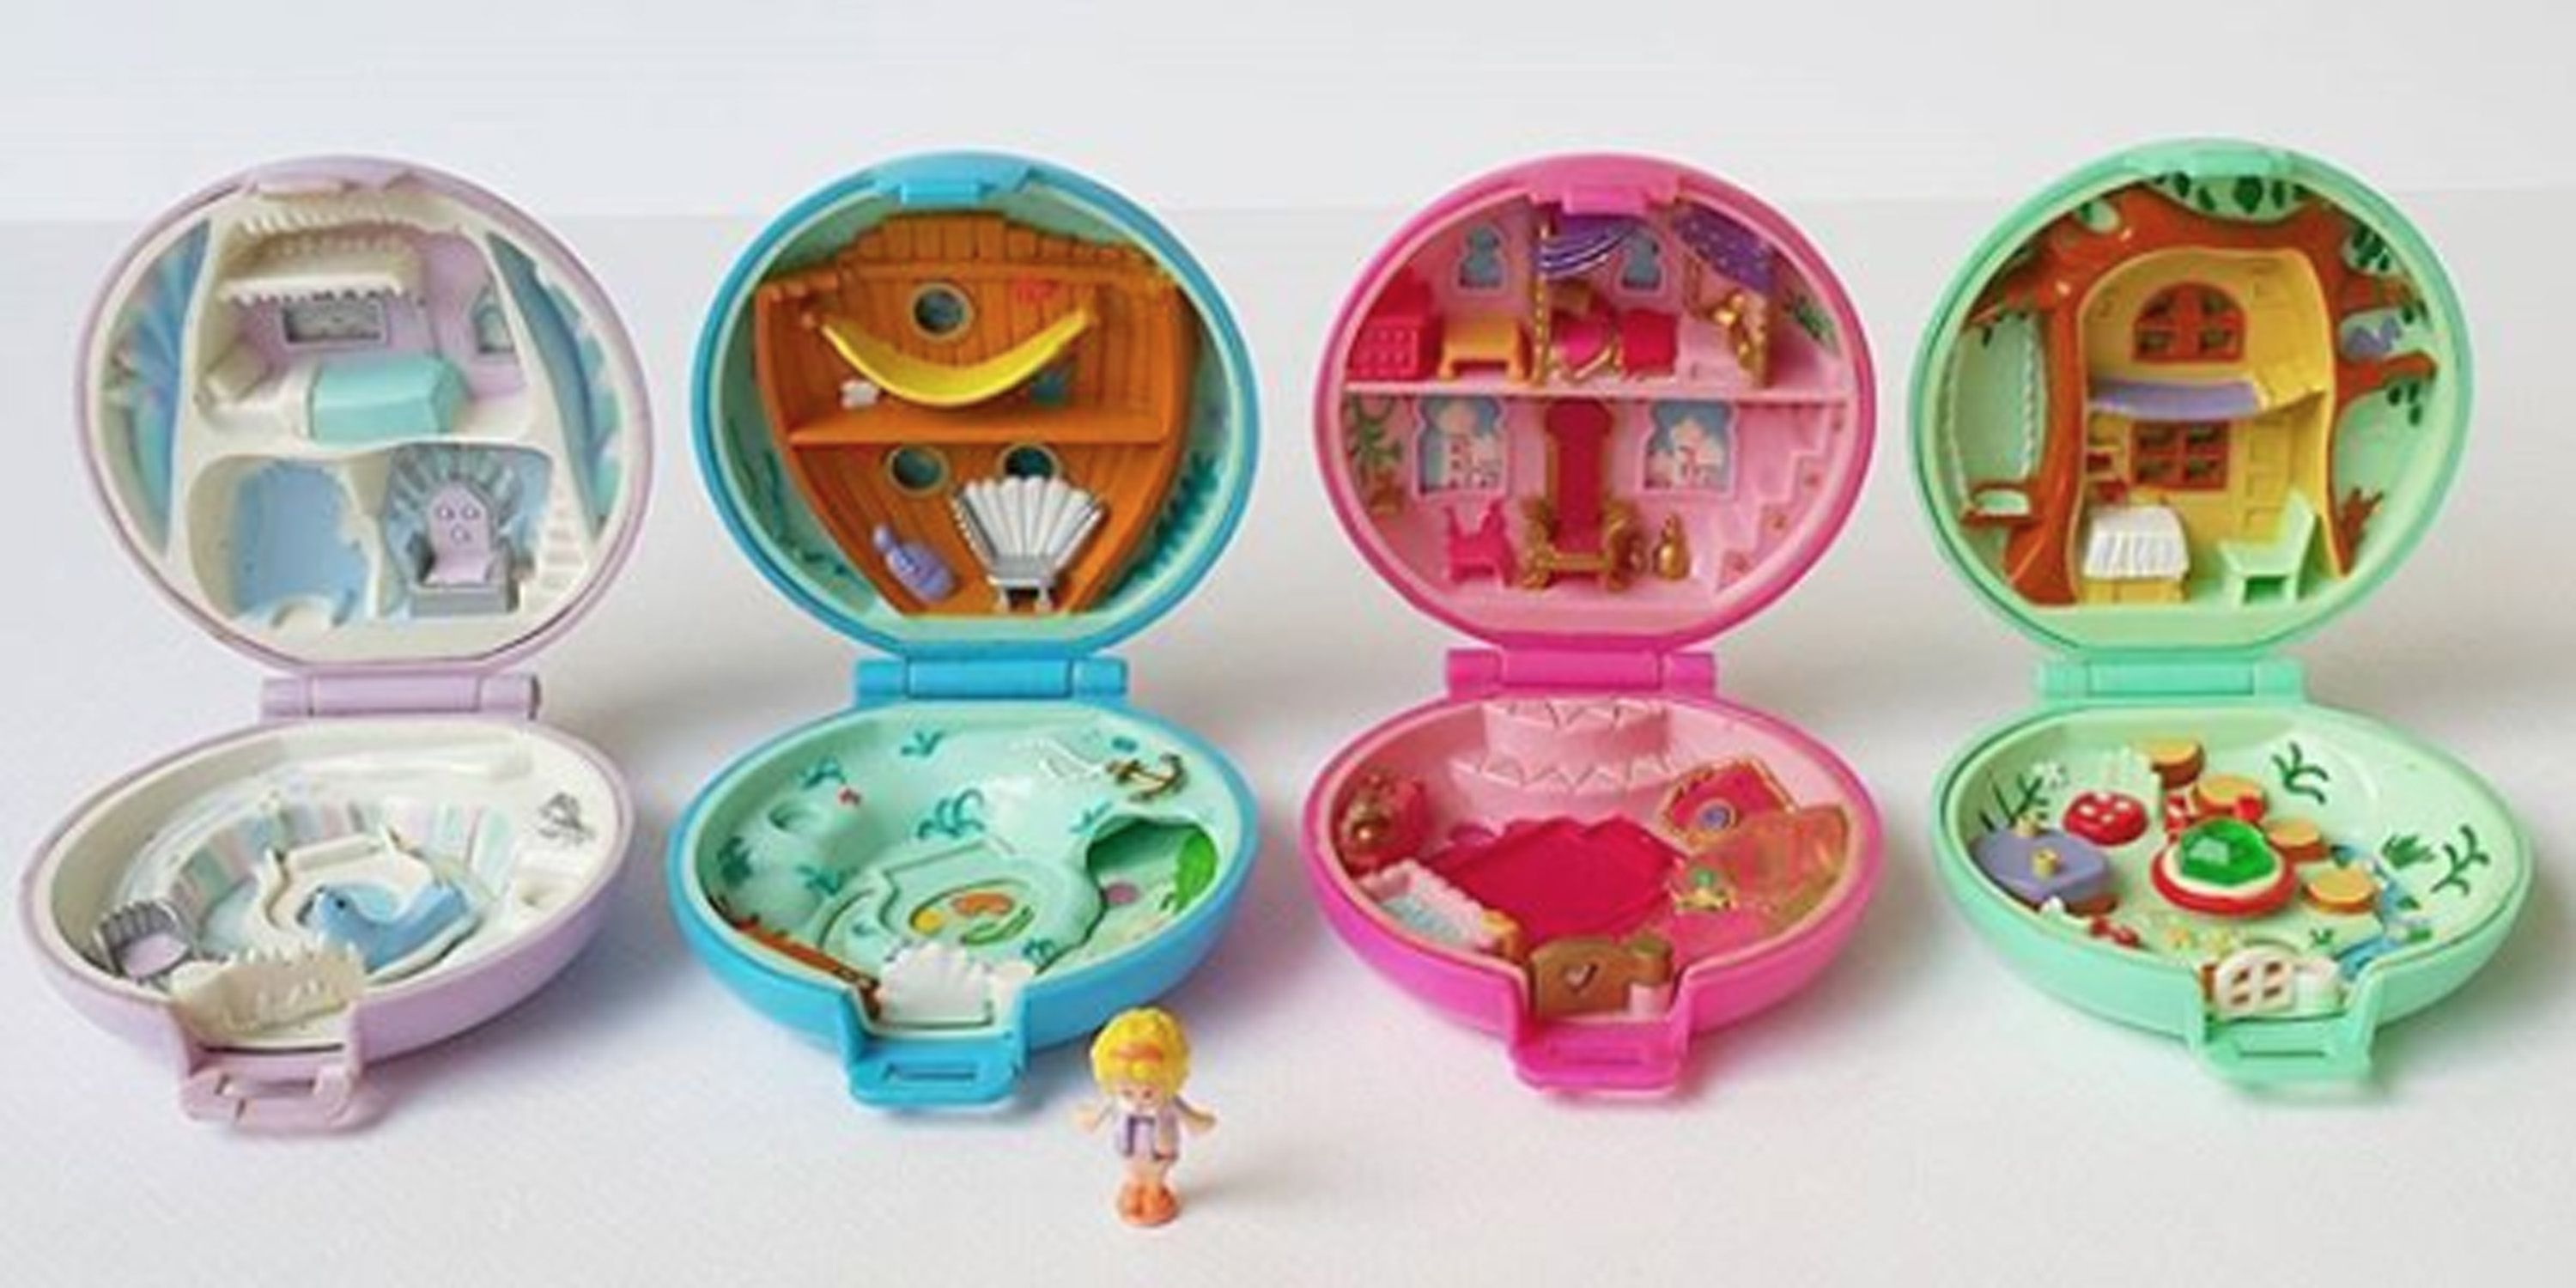 If you have an old Polly Pocket set it could be worth £1,420